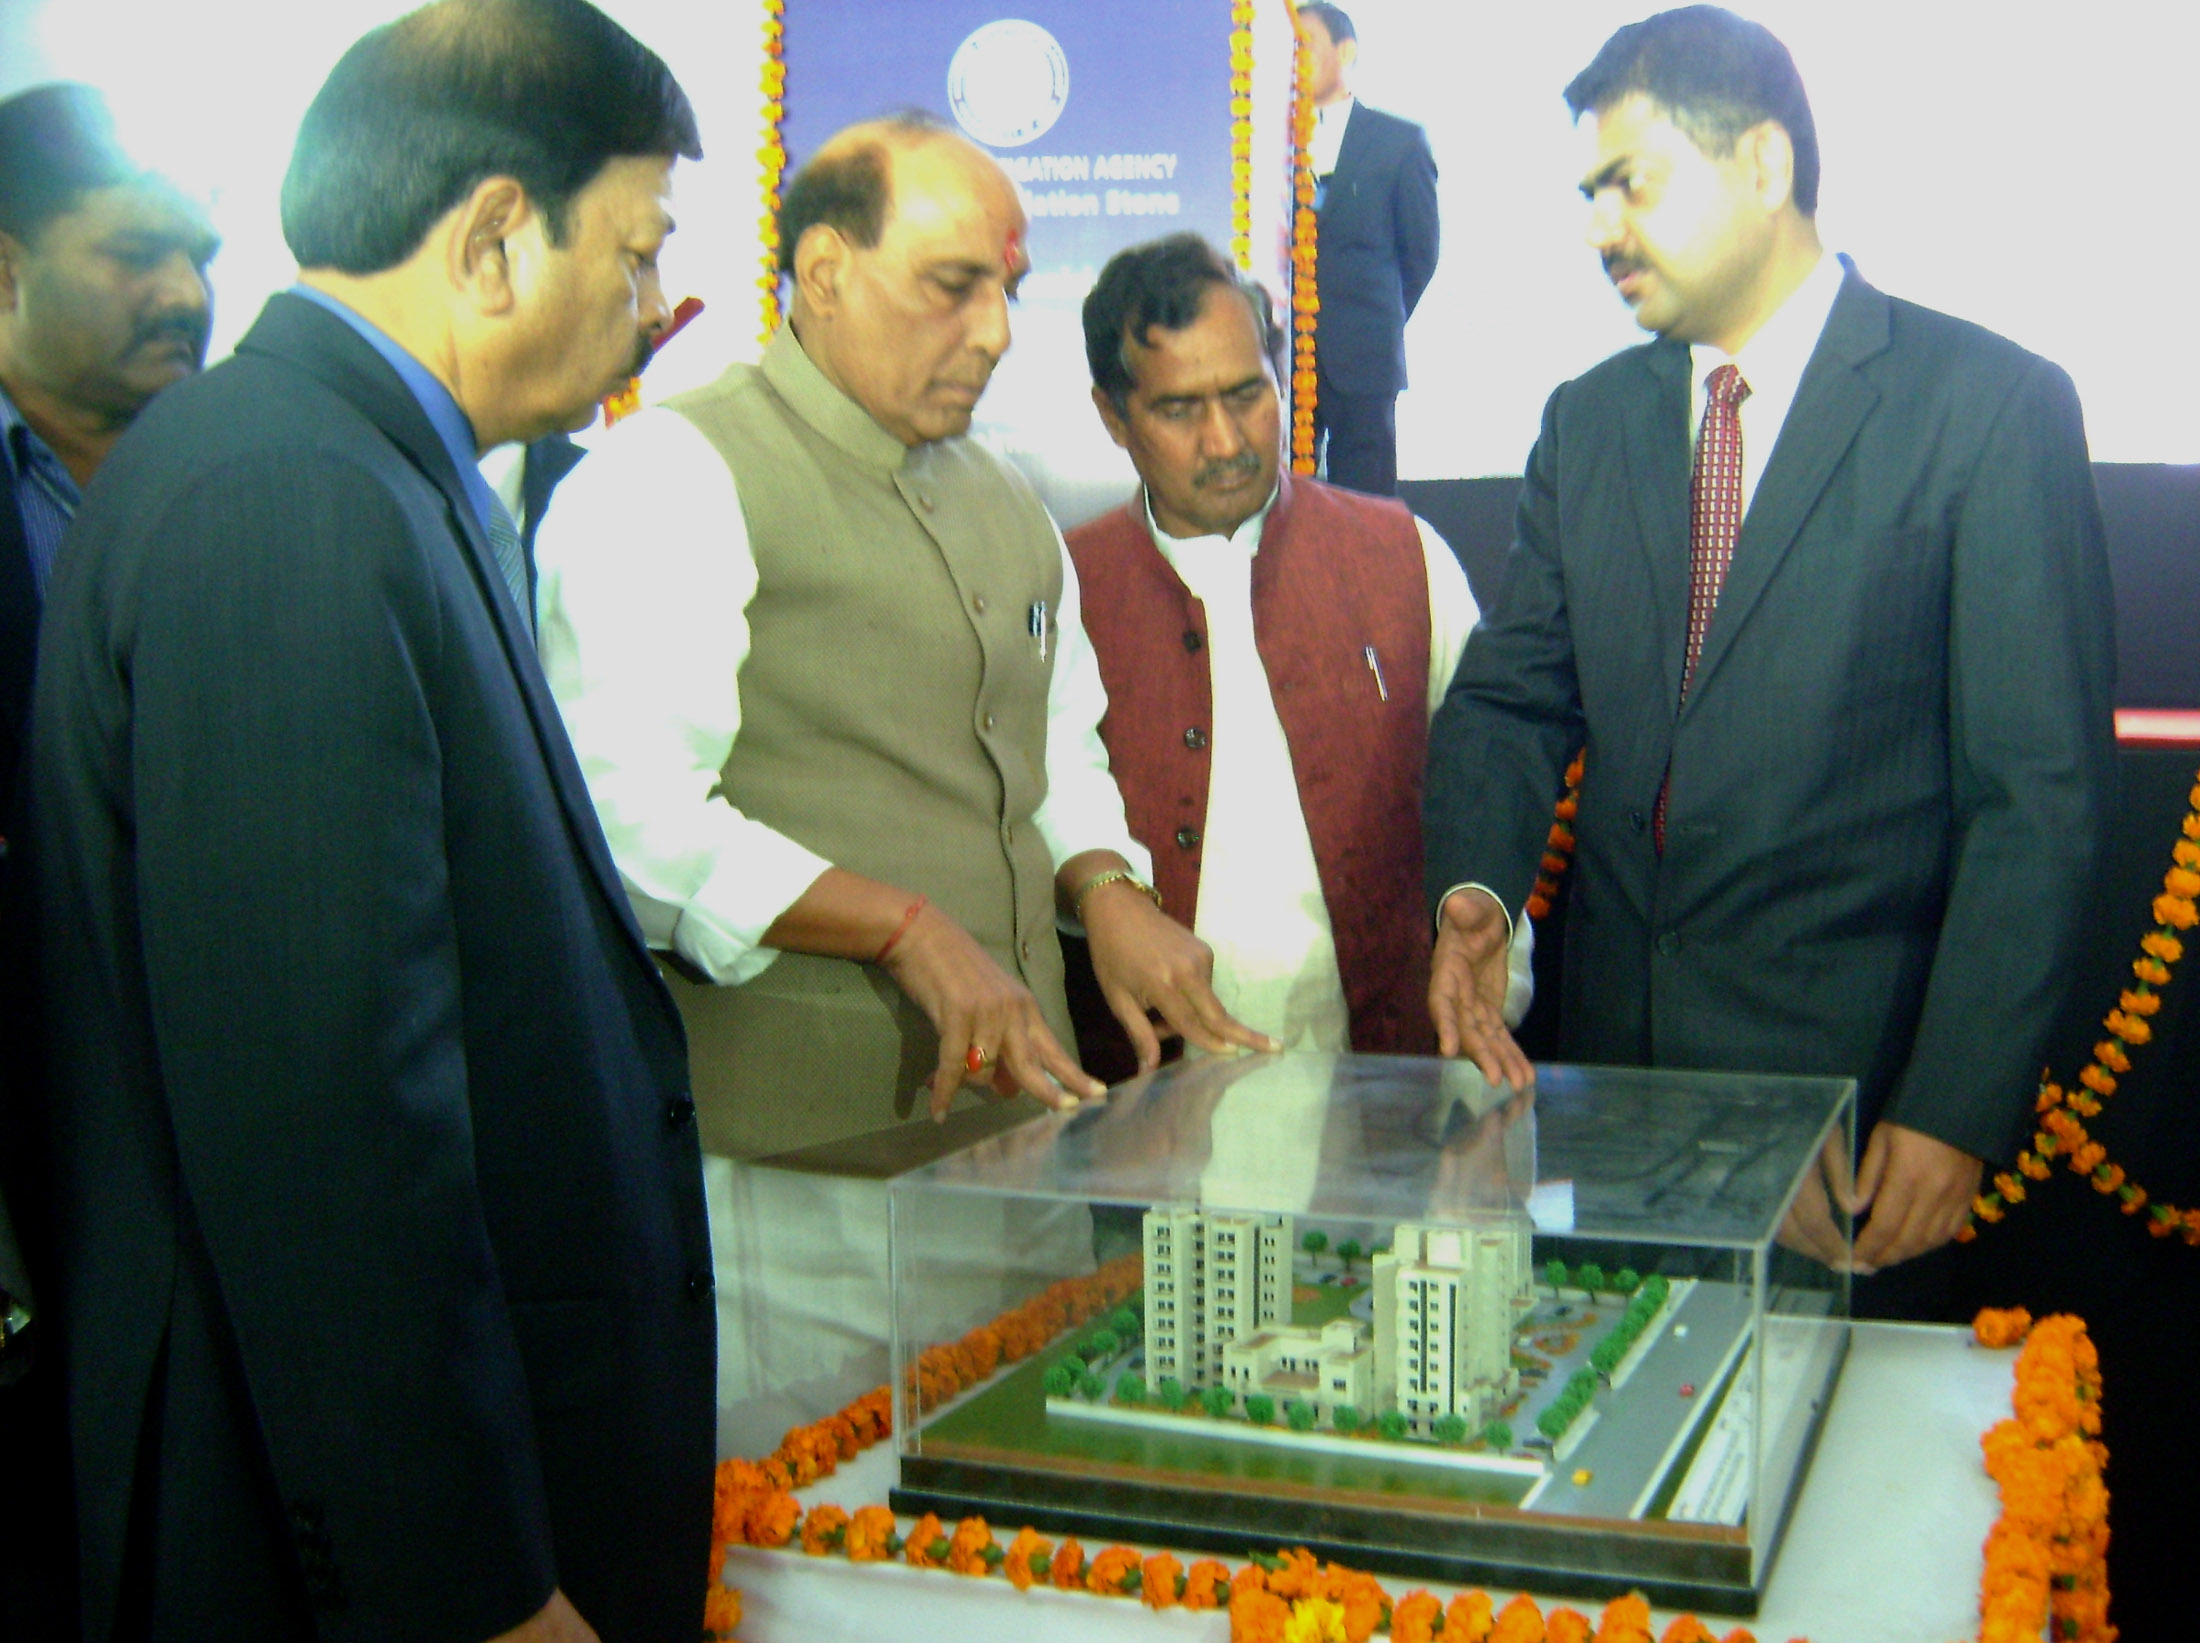 The Union Home Minister, Shri Rajnath Singh inspecting the model of the proposed building of Office-cum-Residential Complex of the National Investigation Agency (NIA), in Lucknow on December 28, 2015.